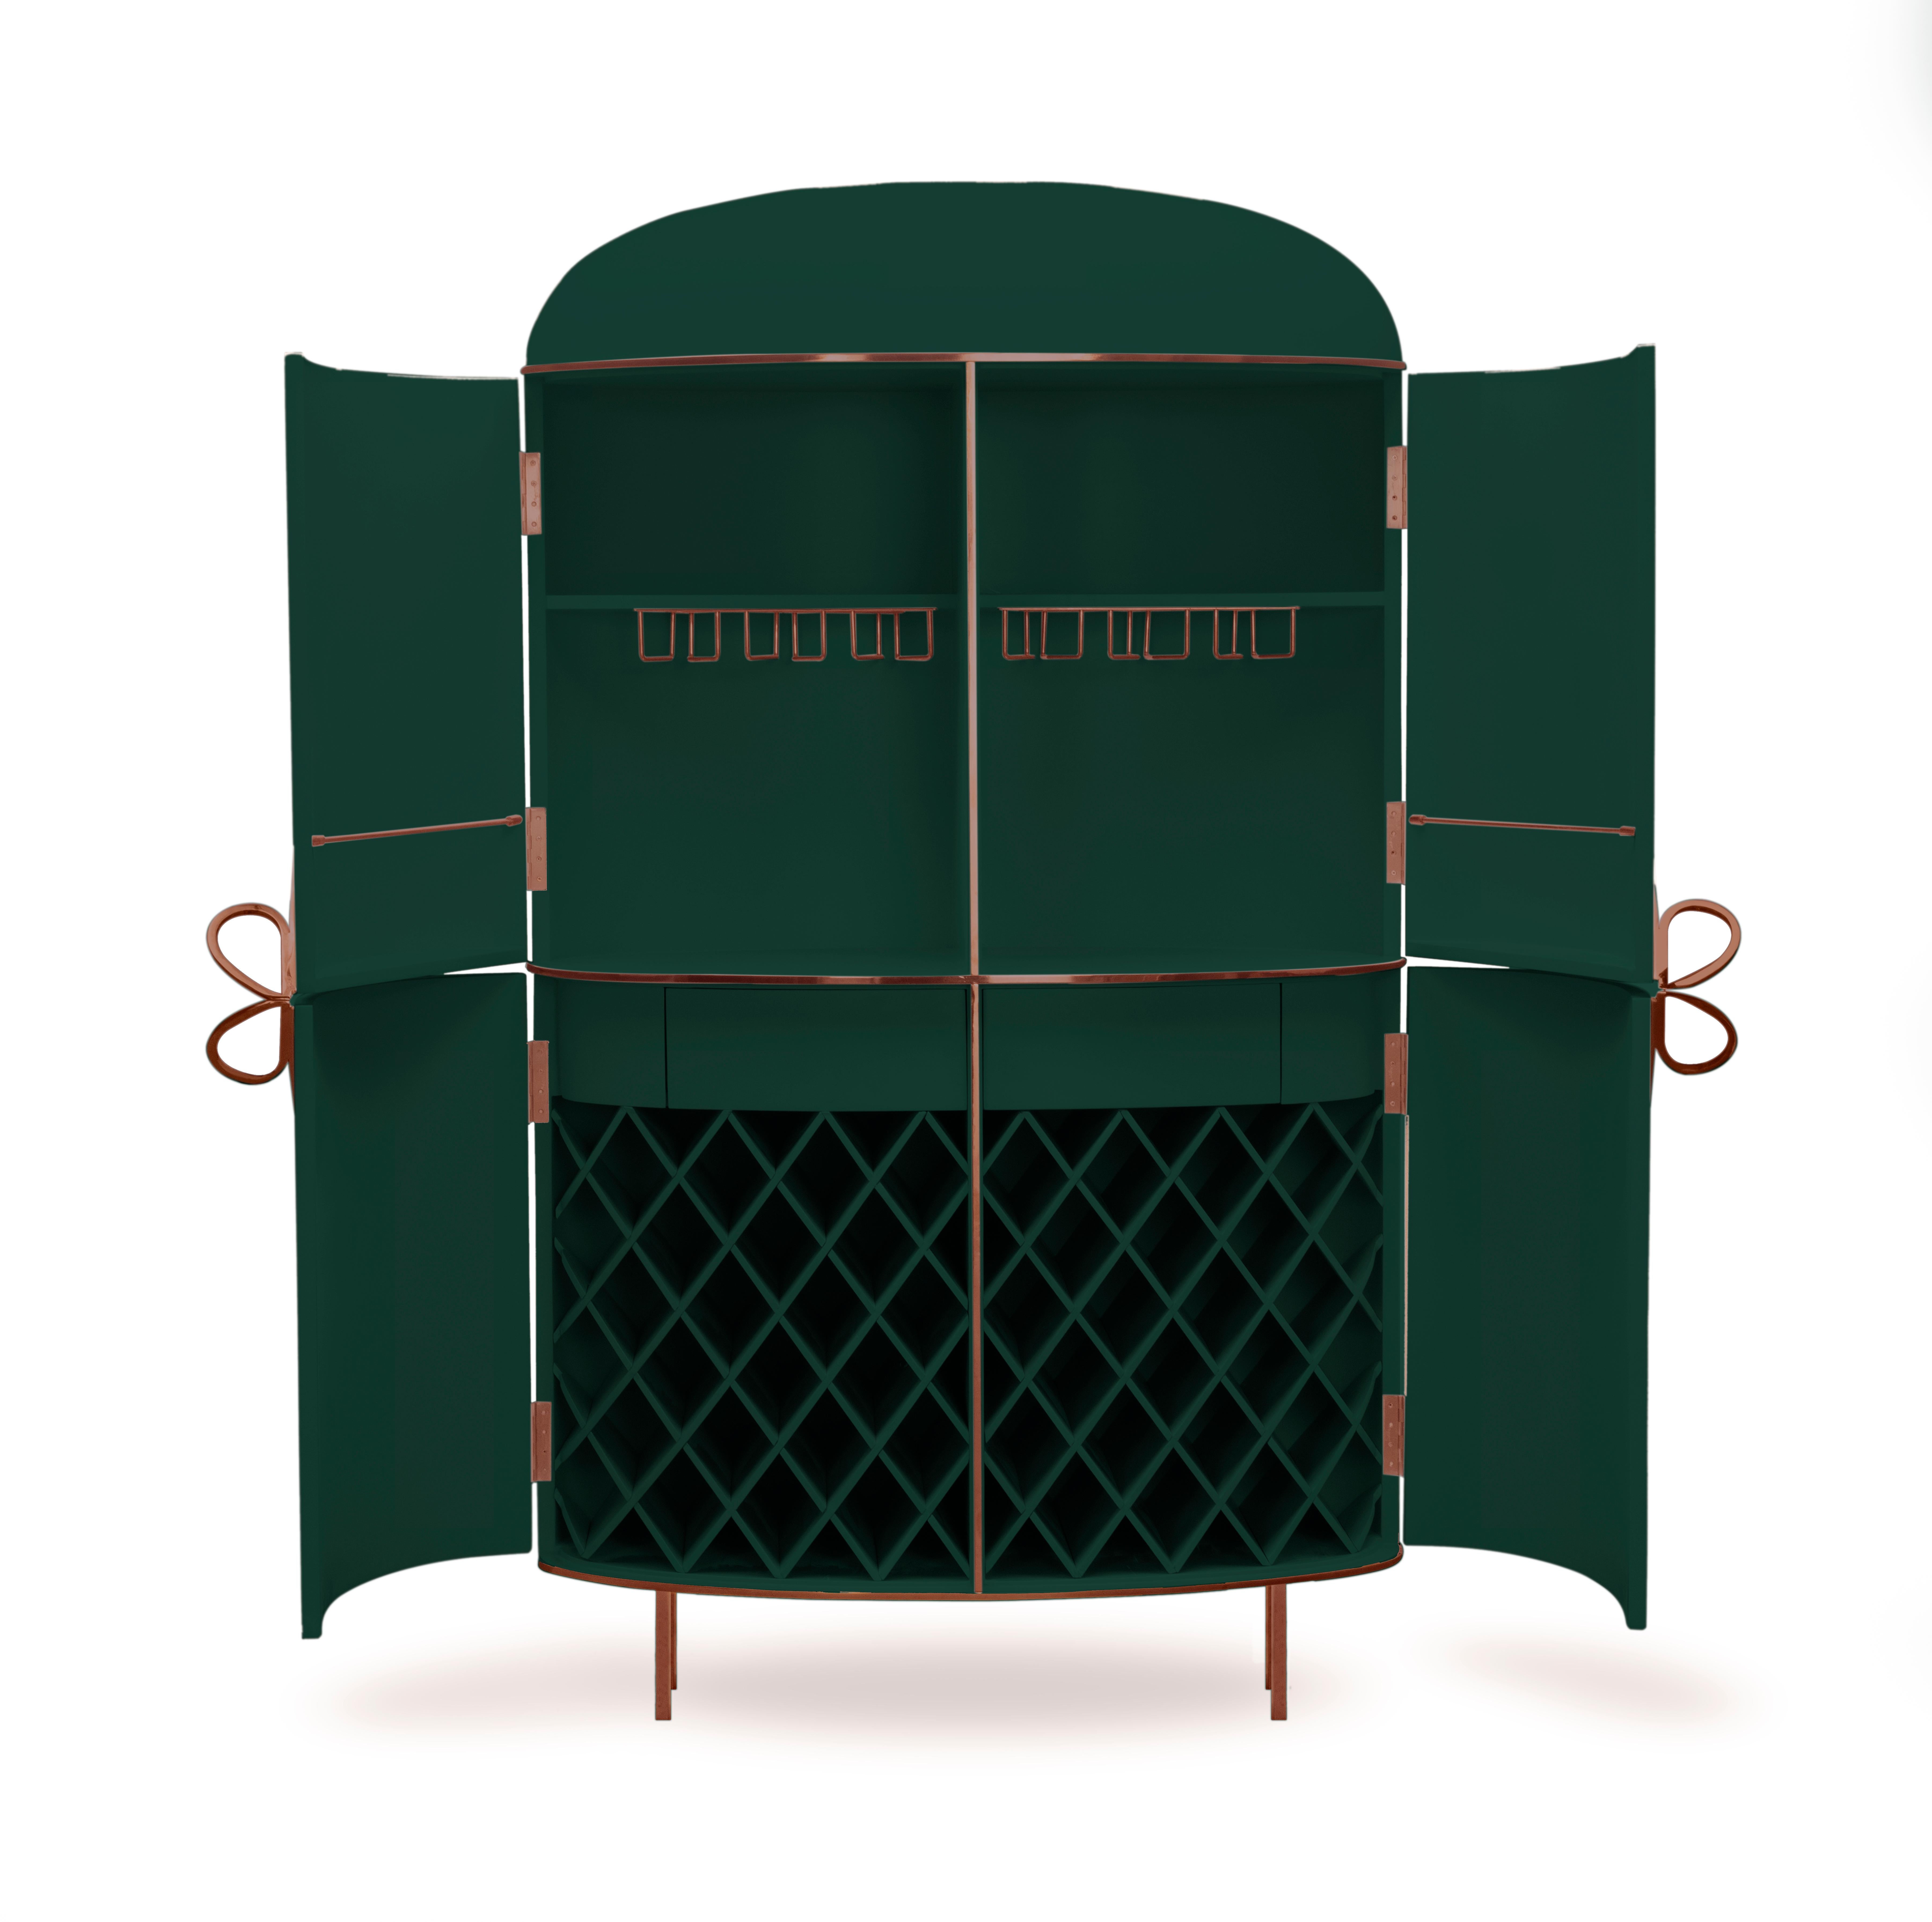 88 Secrets Green Bar Cabinet with Rose Gold Trims by Nika Zupanc is a rich, deep green bar cabinet in sensuous, feminine lines with luxurious metal trims in rose gold. A statement piece in any interior space!

Nika Zupanc, a strikingly renowned